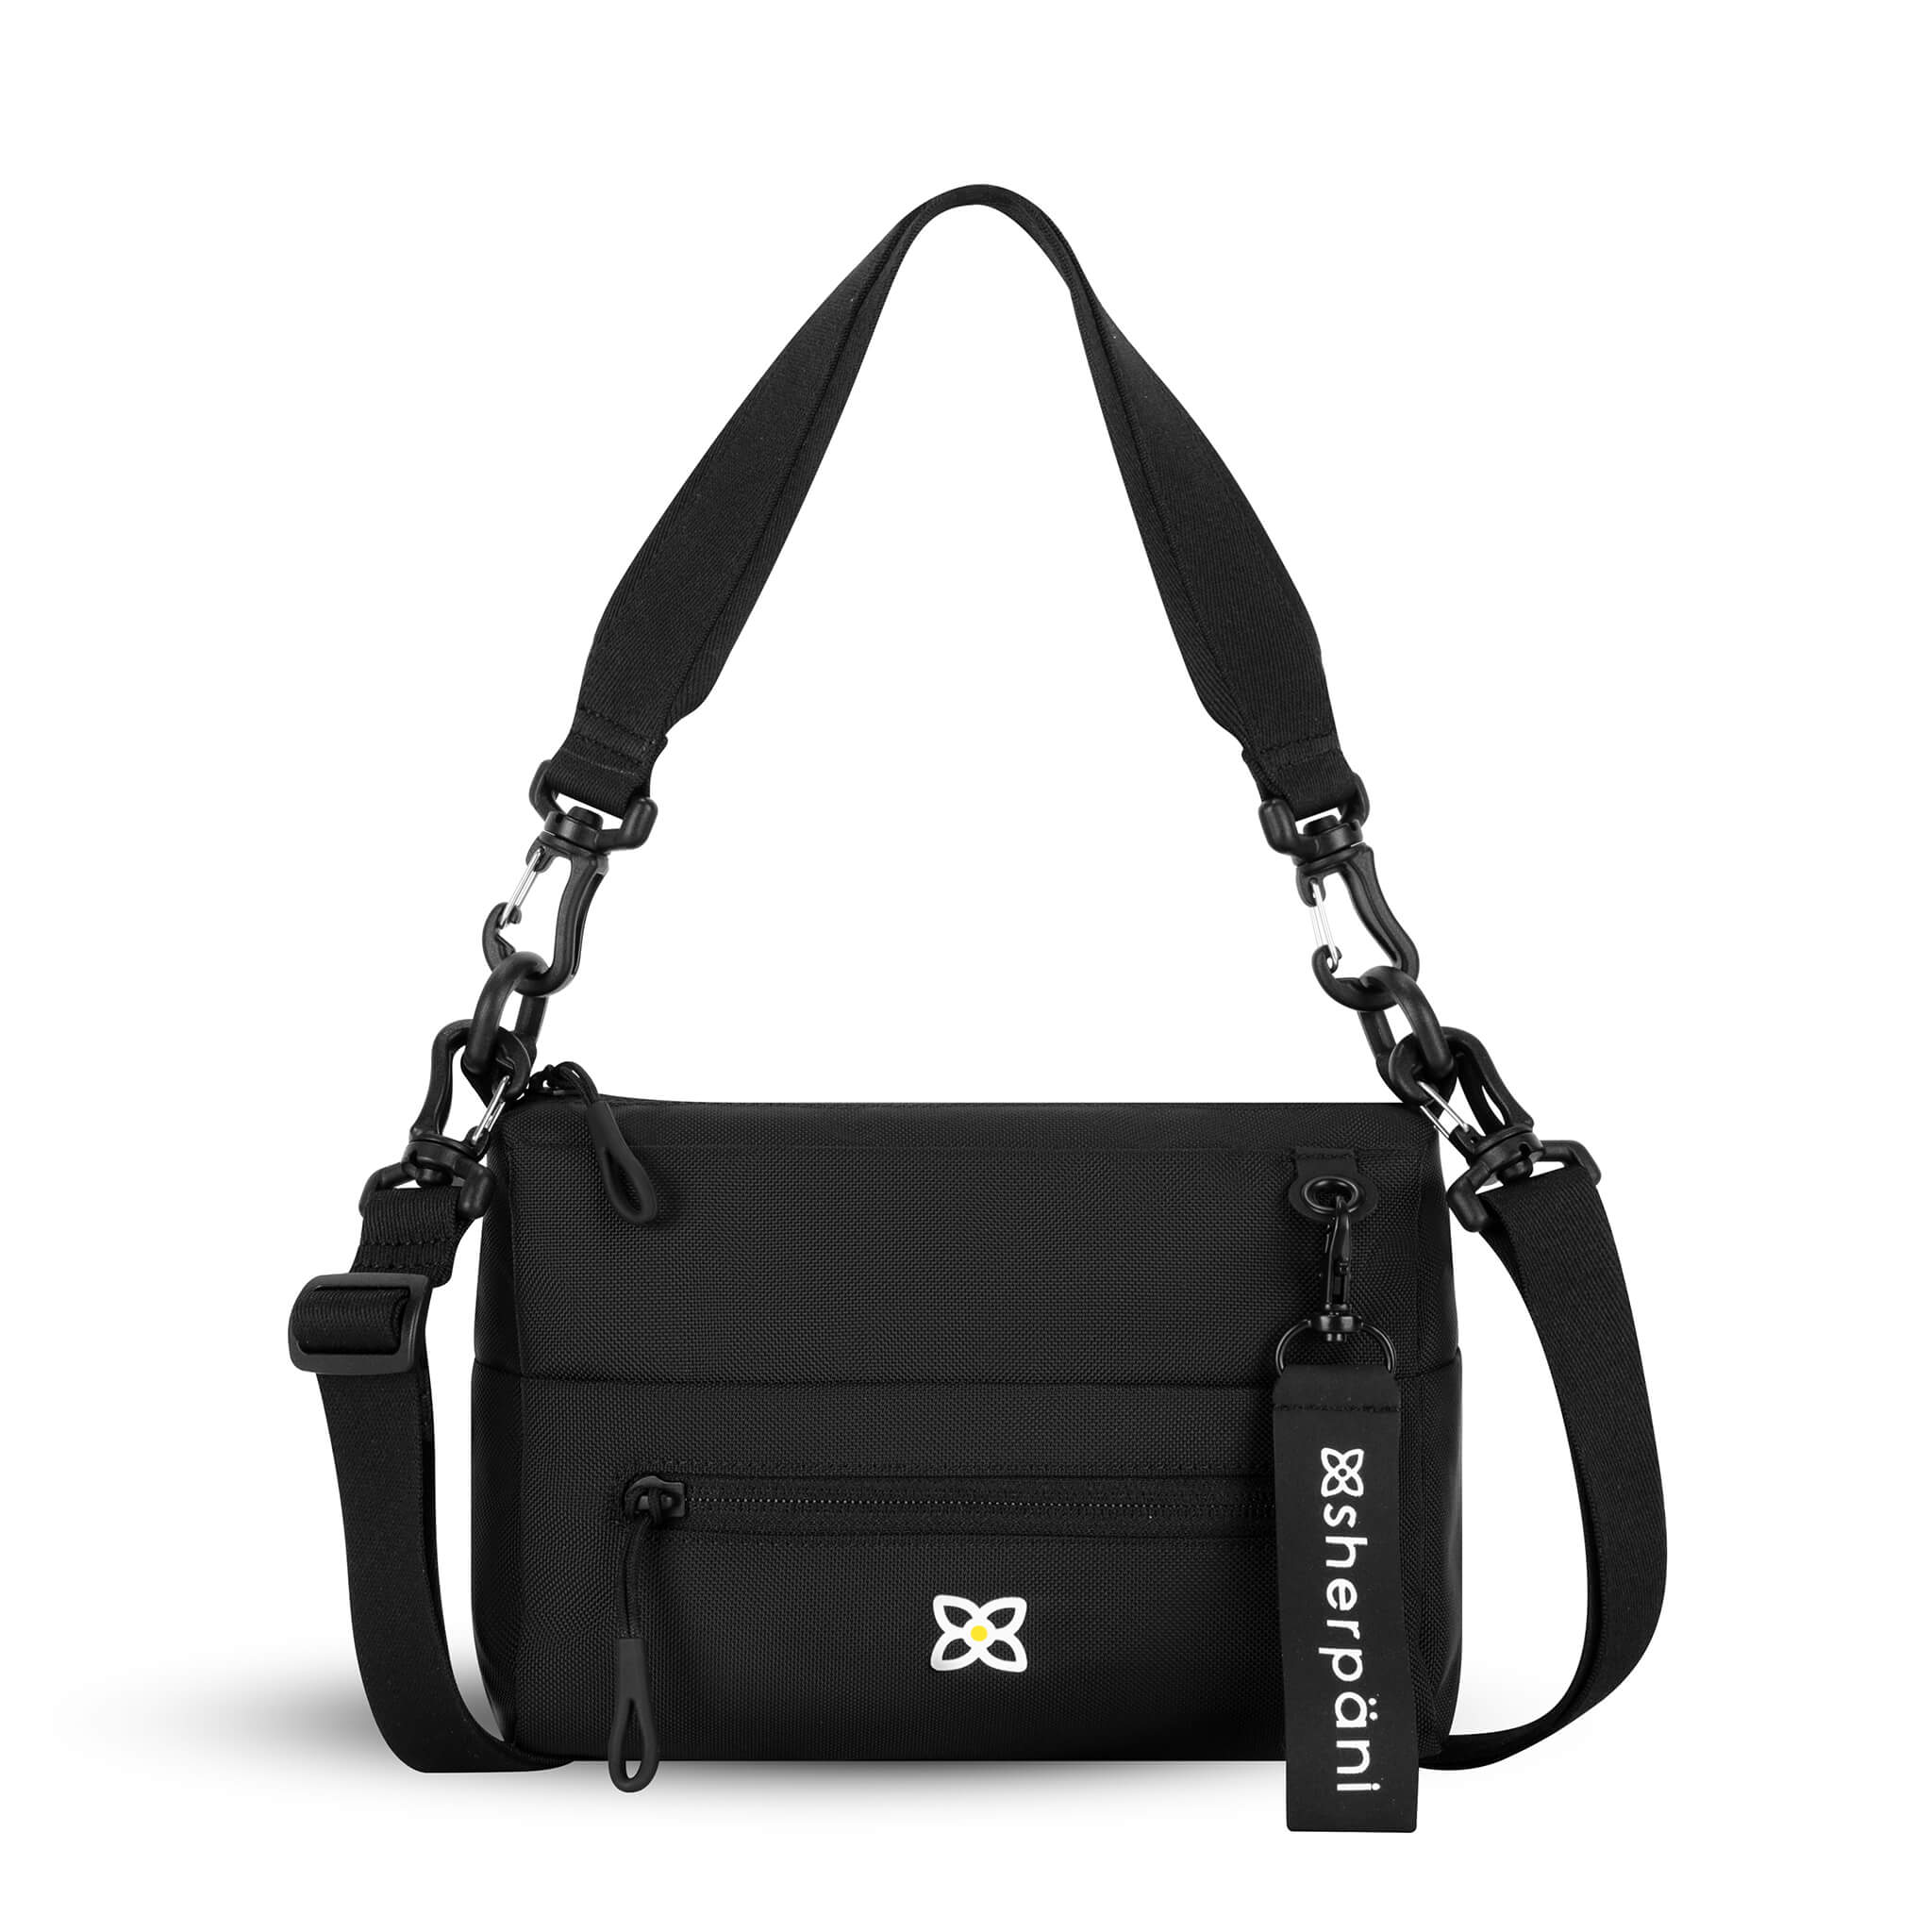 Flat front view of Sherpani mini shoulder bag, the Skye in Raven. Skye features include RFID security, detachable keychain, outside zipper pocket, two inside zipper pockets and two removable straps: a short shoulder strap and a longer adjustable crossbody strap. The Raven color is solid black with Sherpani logo (edelweiss flower) as a white accent.